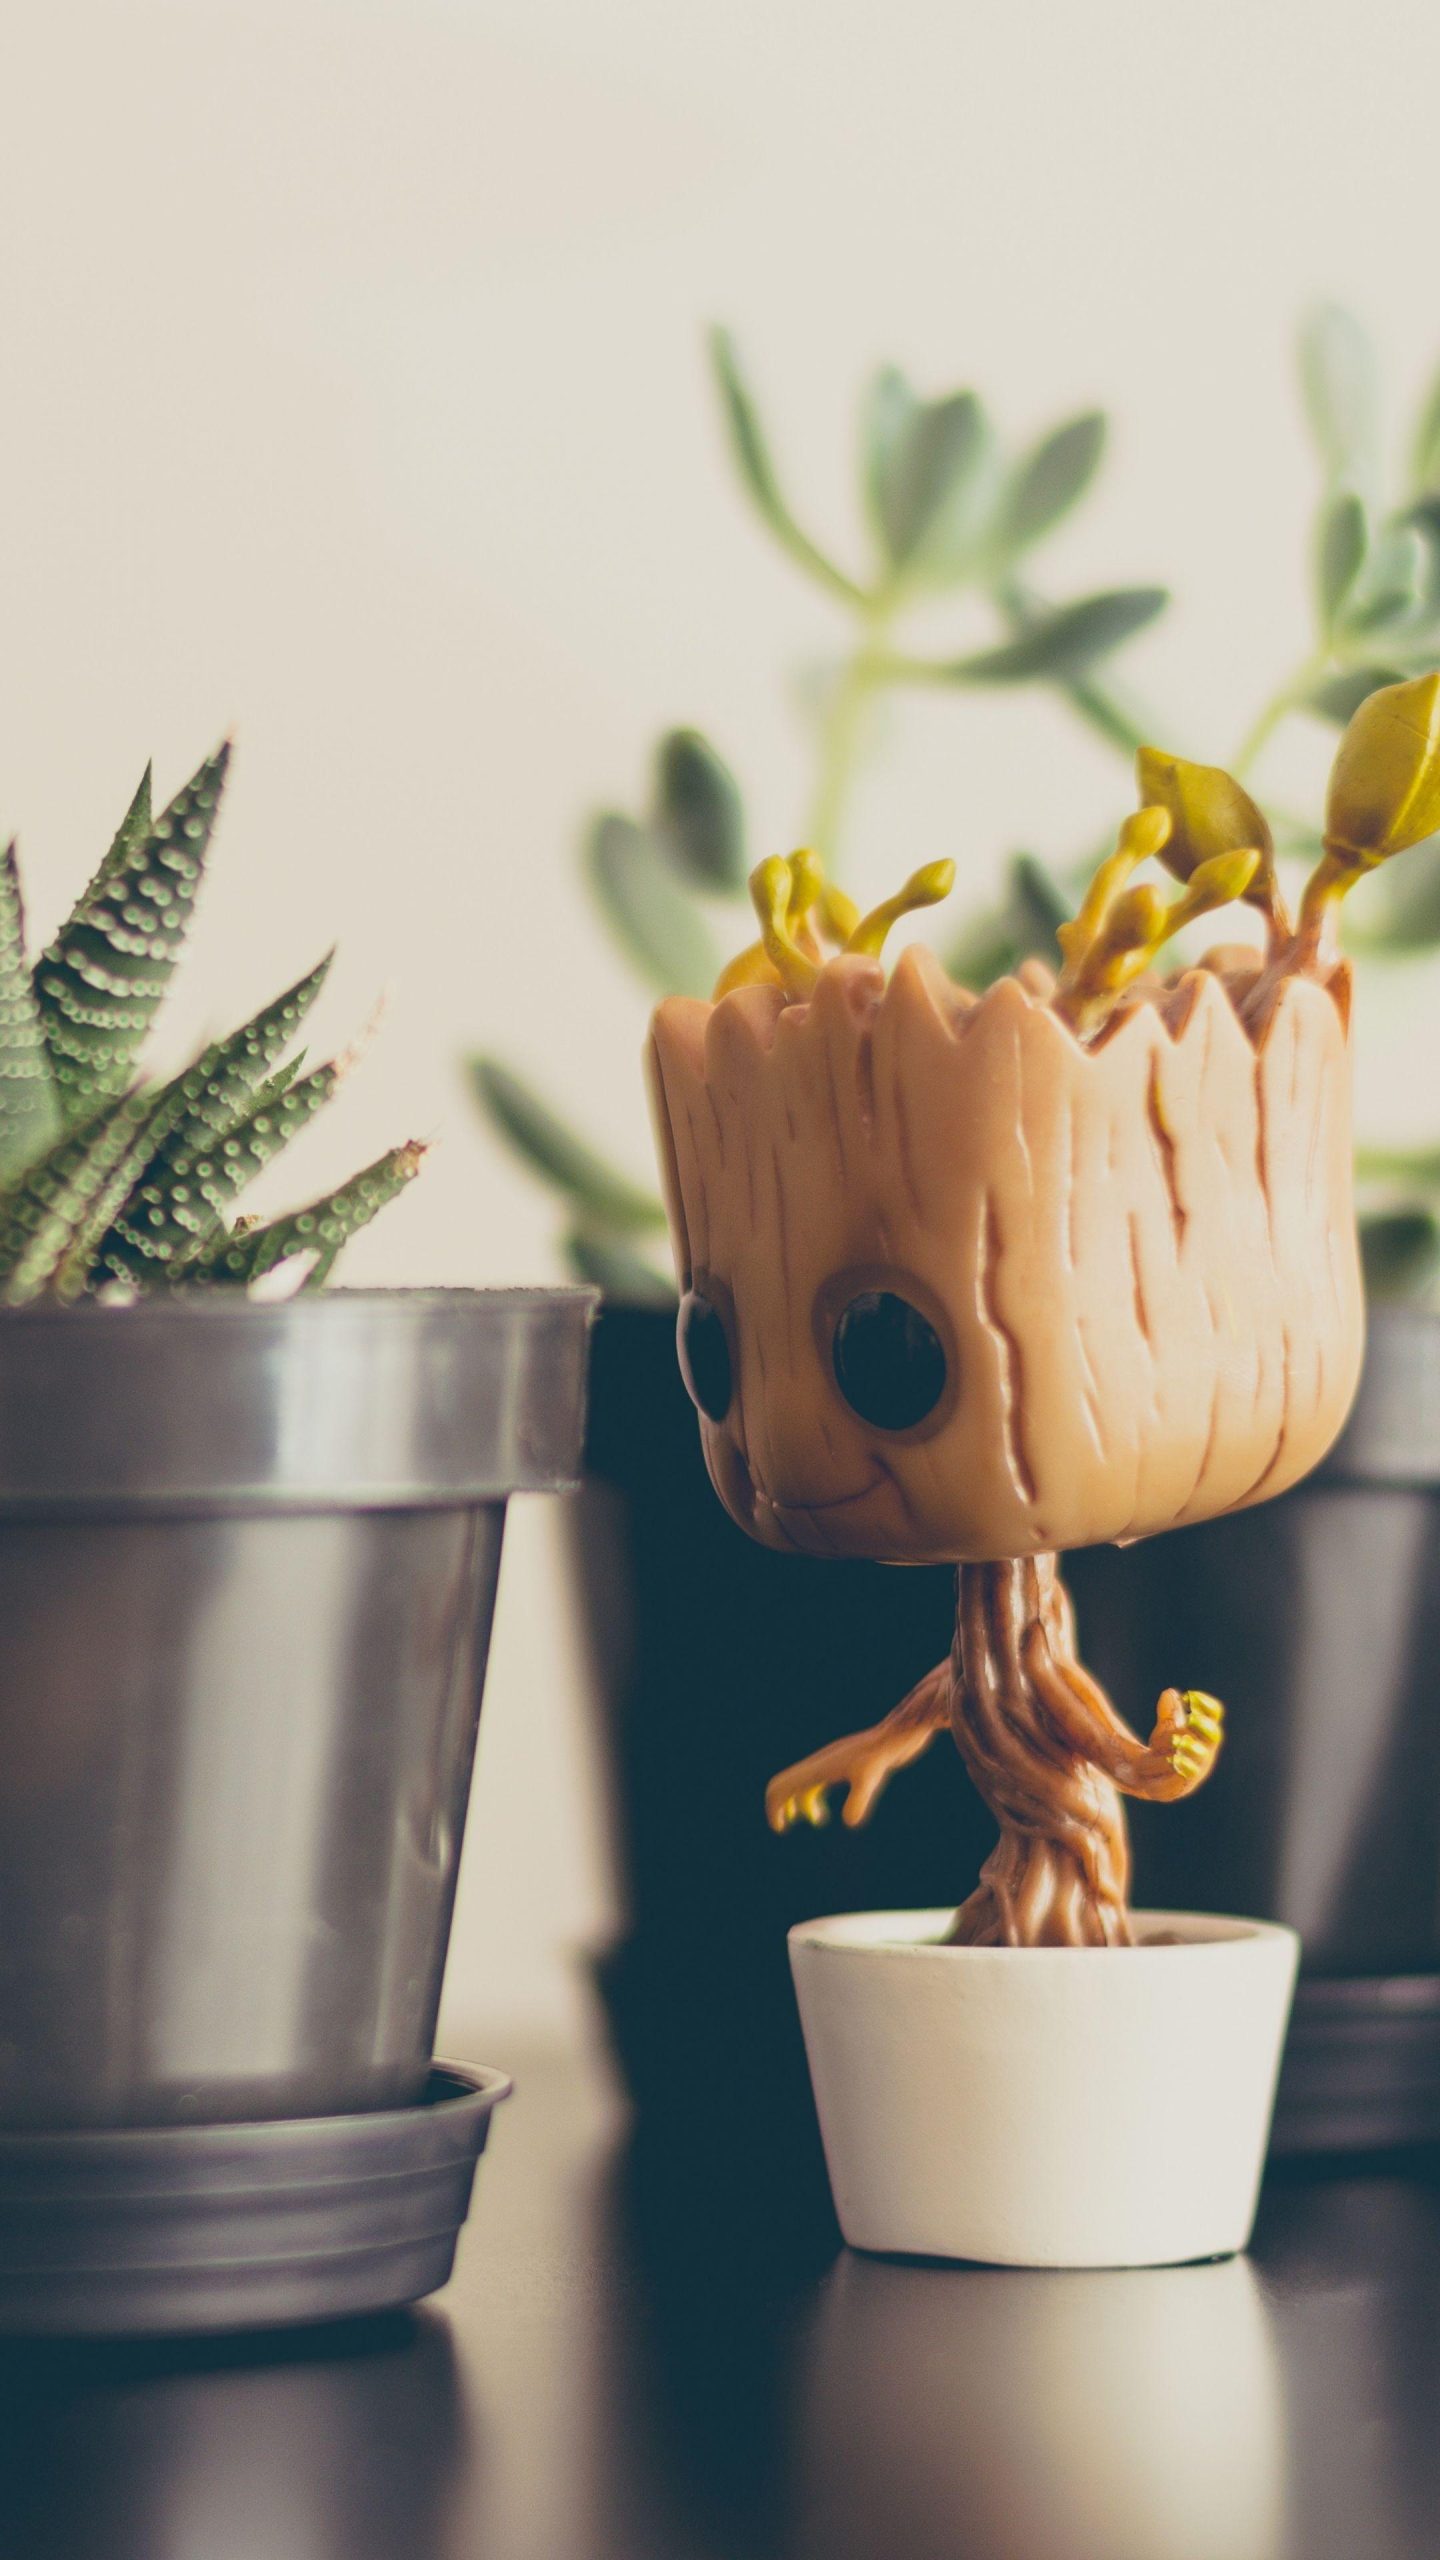 Cute Baby Groot Guardians Of The Galaxy Iphone wallpaper 4k, Cute Baby Groot Guardians Of The Galaxy, Movies